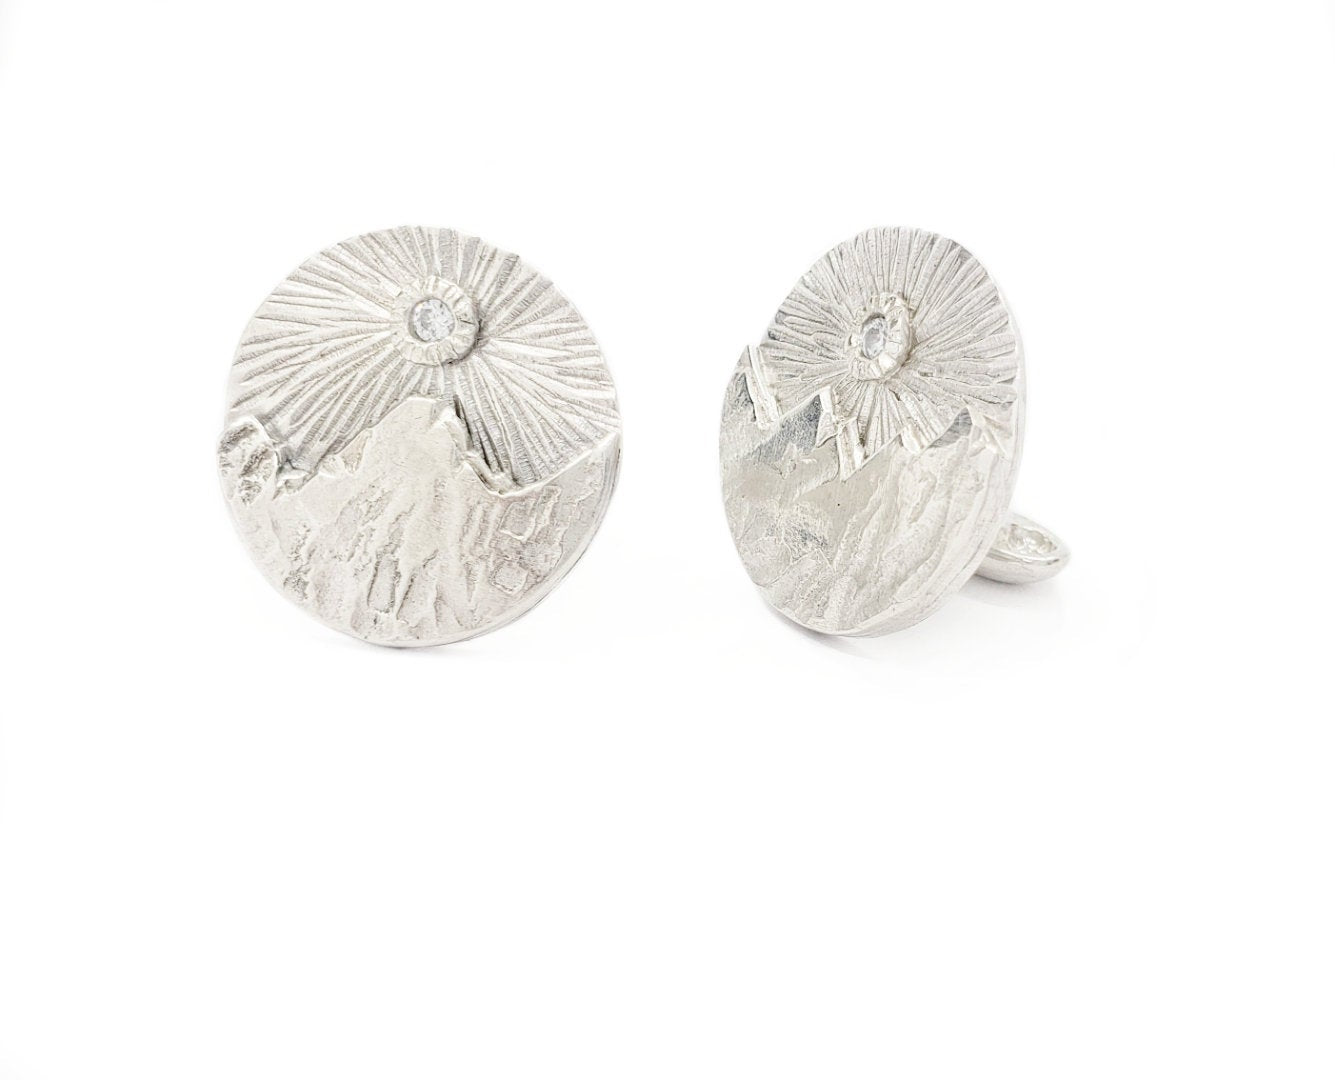 Cuff Links - Sunrays over Mountains - Sterling Silver